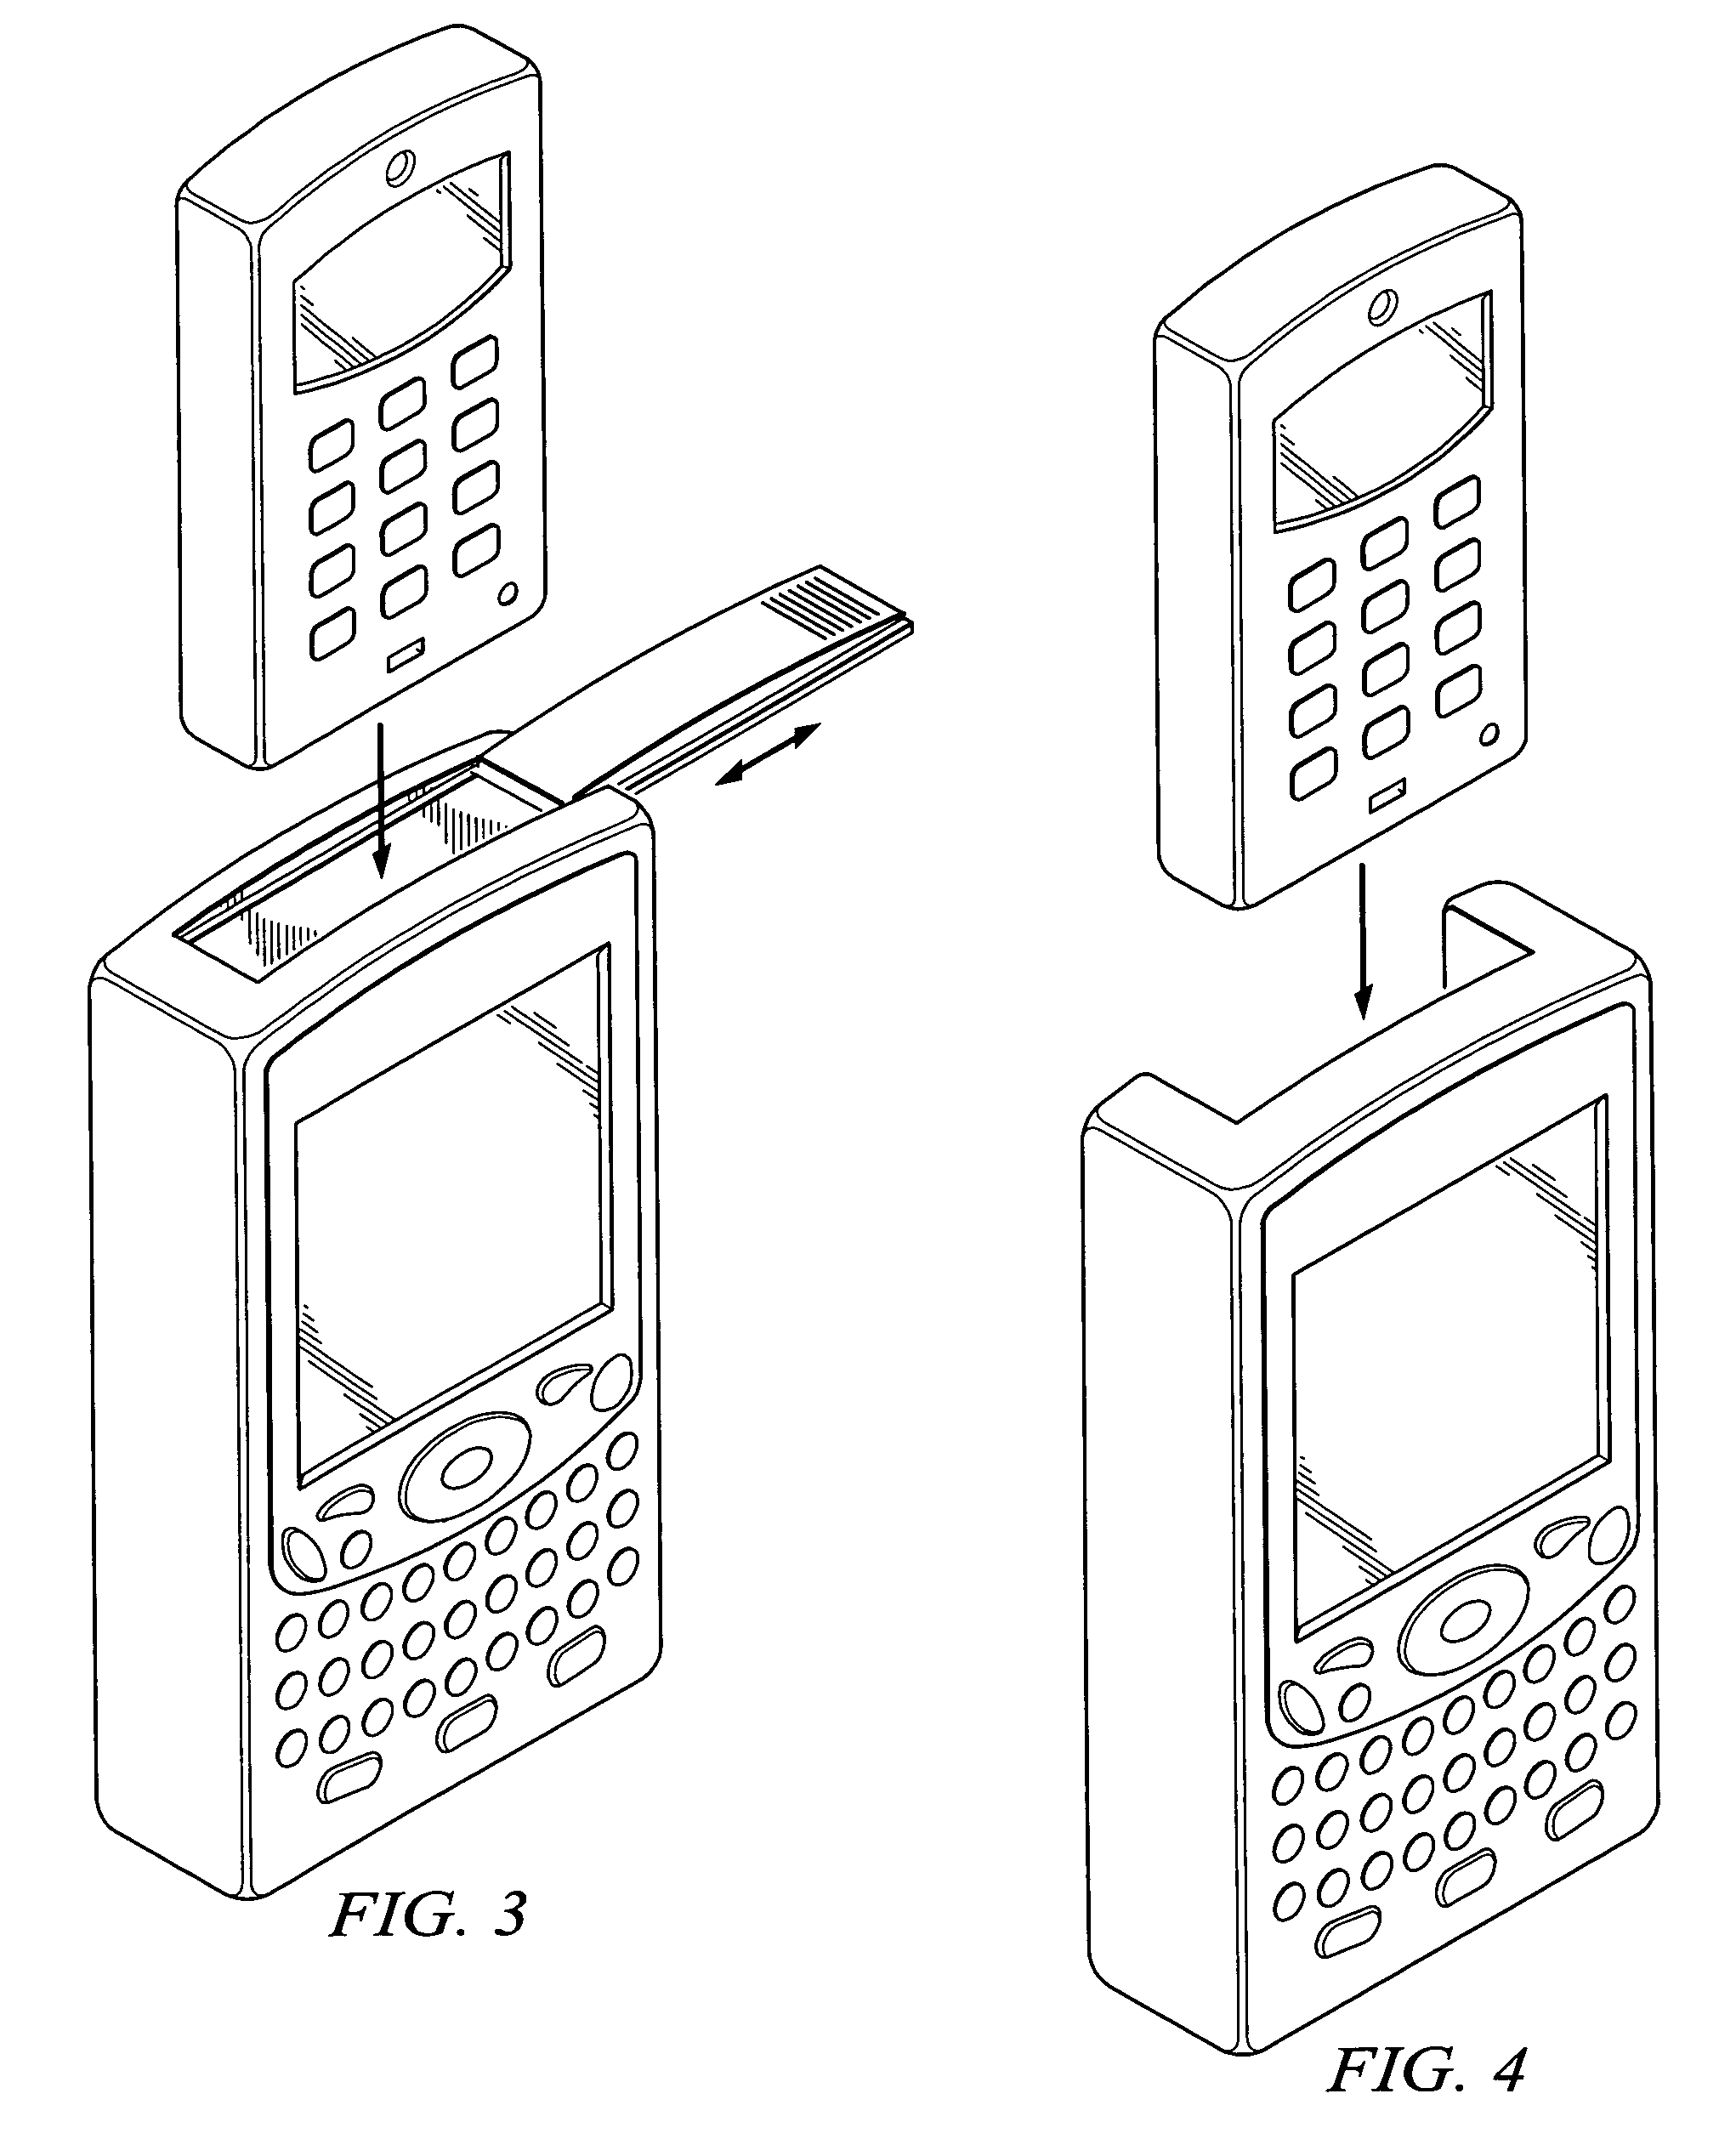 Mobile handheld electronic device with a removable cellphone